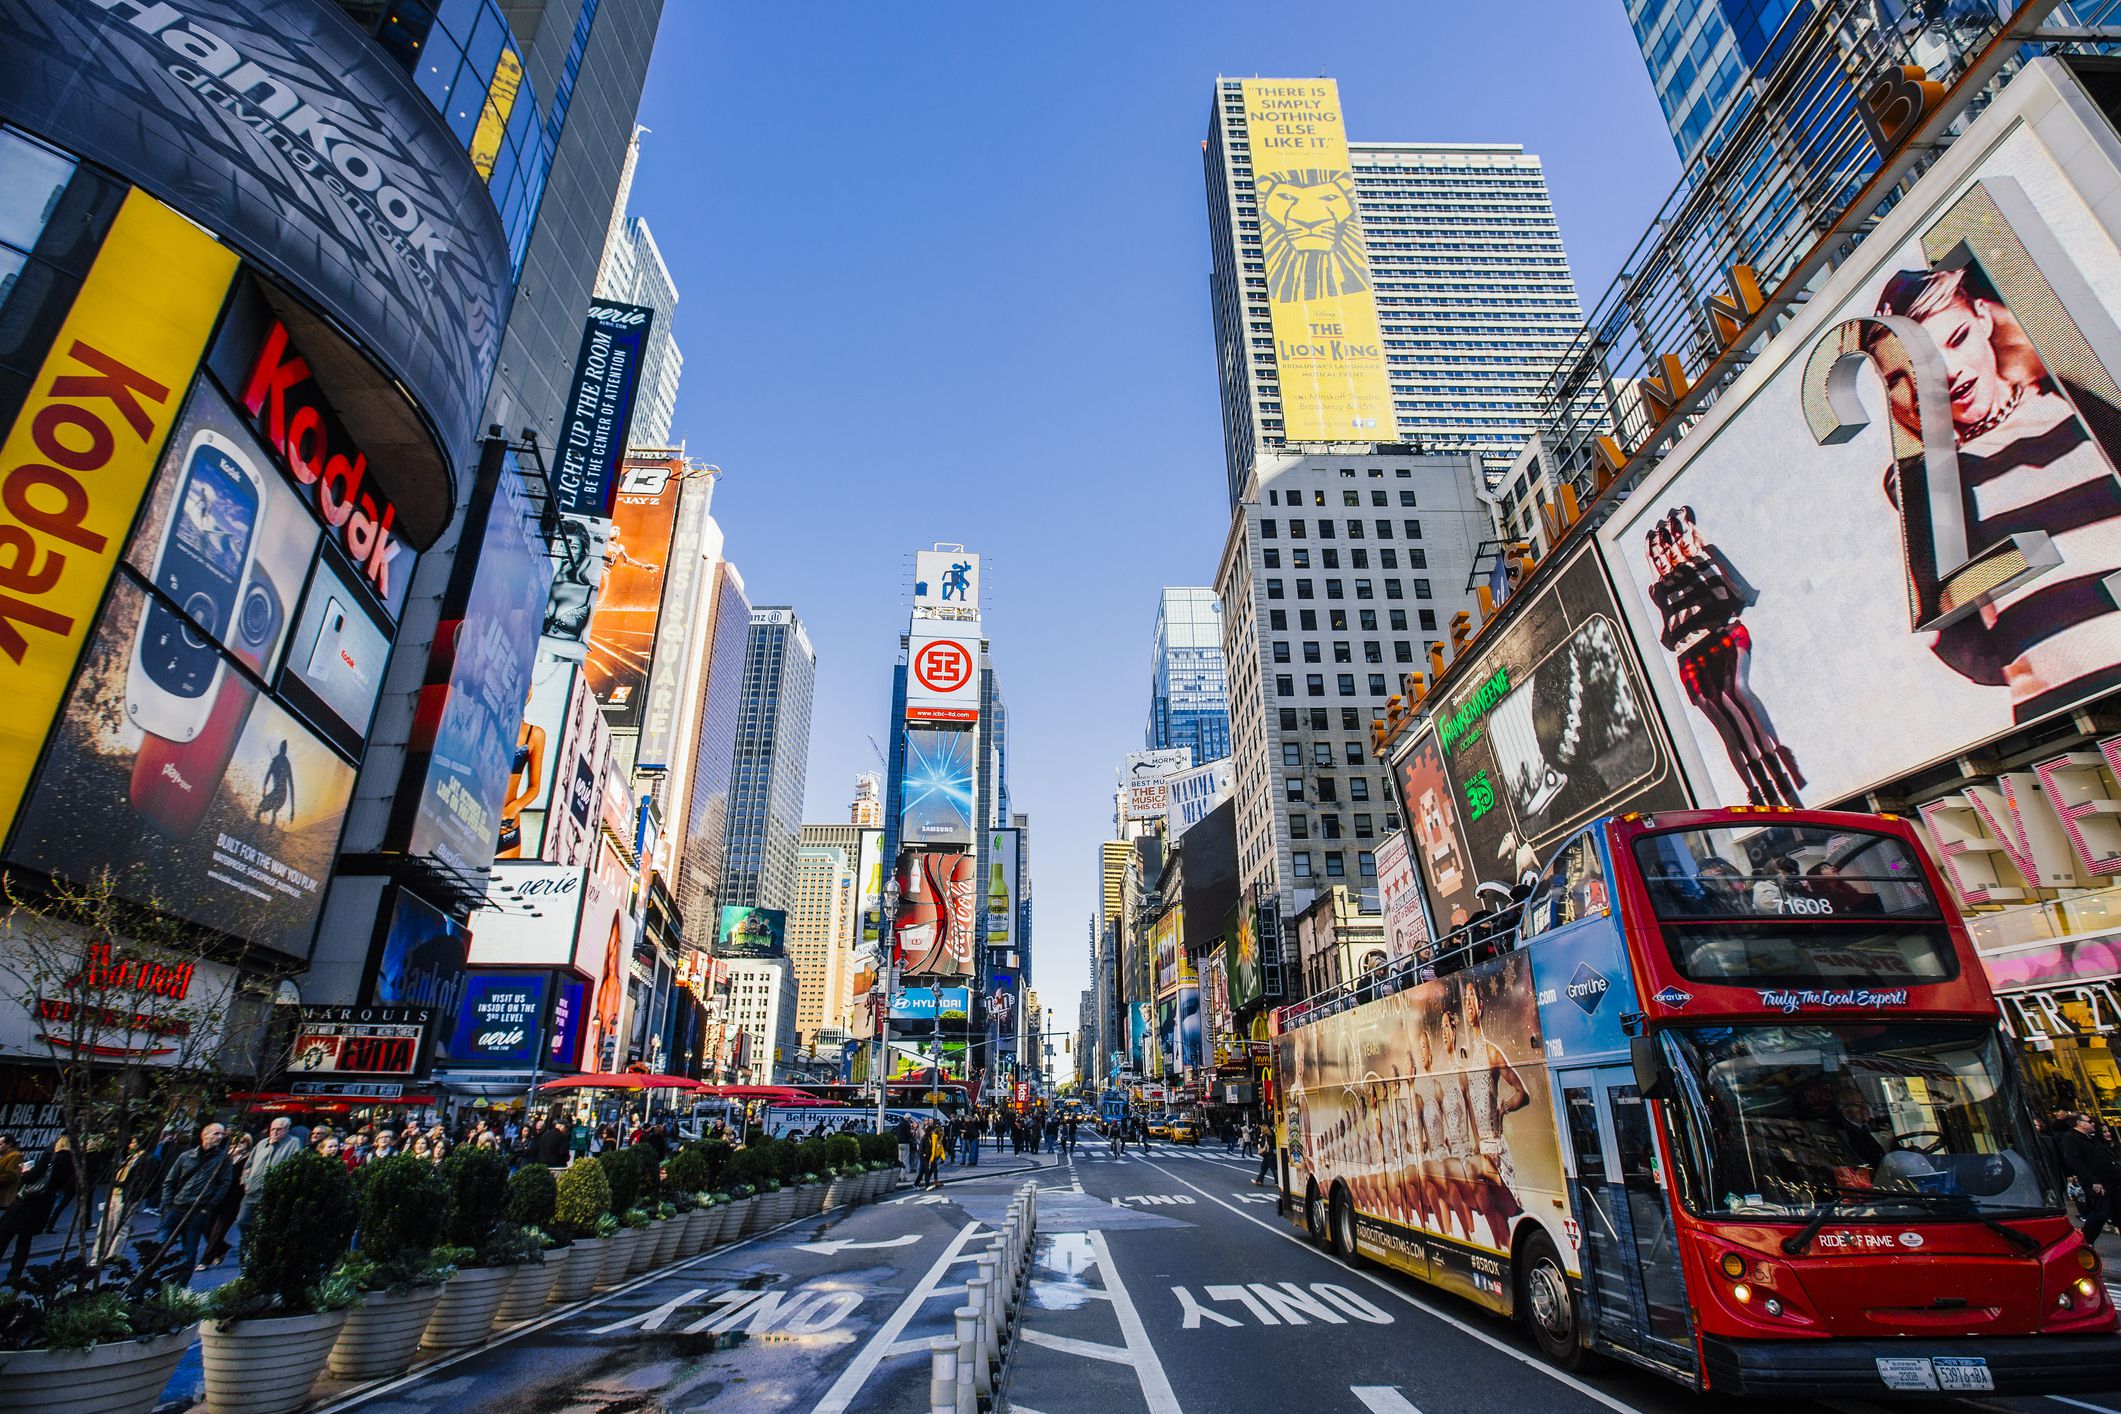 5 Best Bus Tours in New York City